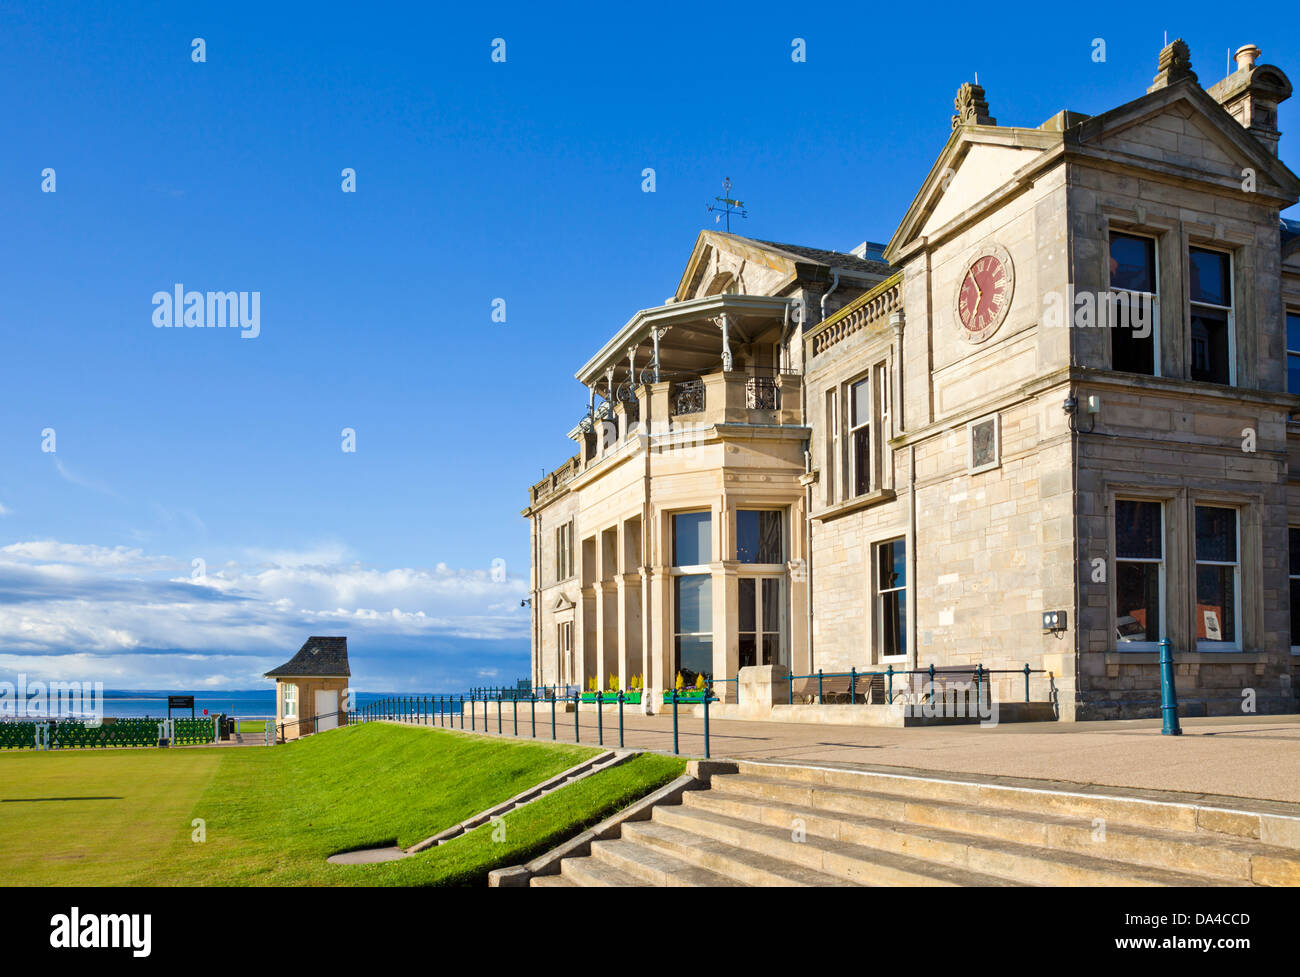 St Andrews Scotland St Andrews golf The Royal and Ancient Golf Club of St Andrews golf course and club house St Andrews Fife Scotland UK GB Europe Stock Photo